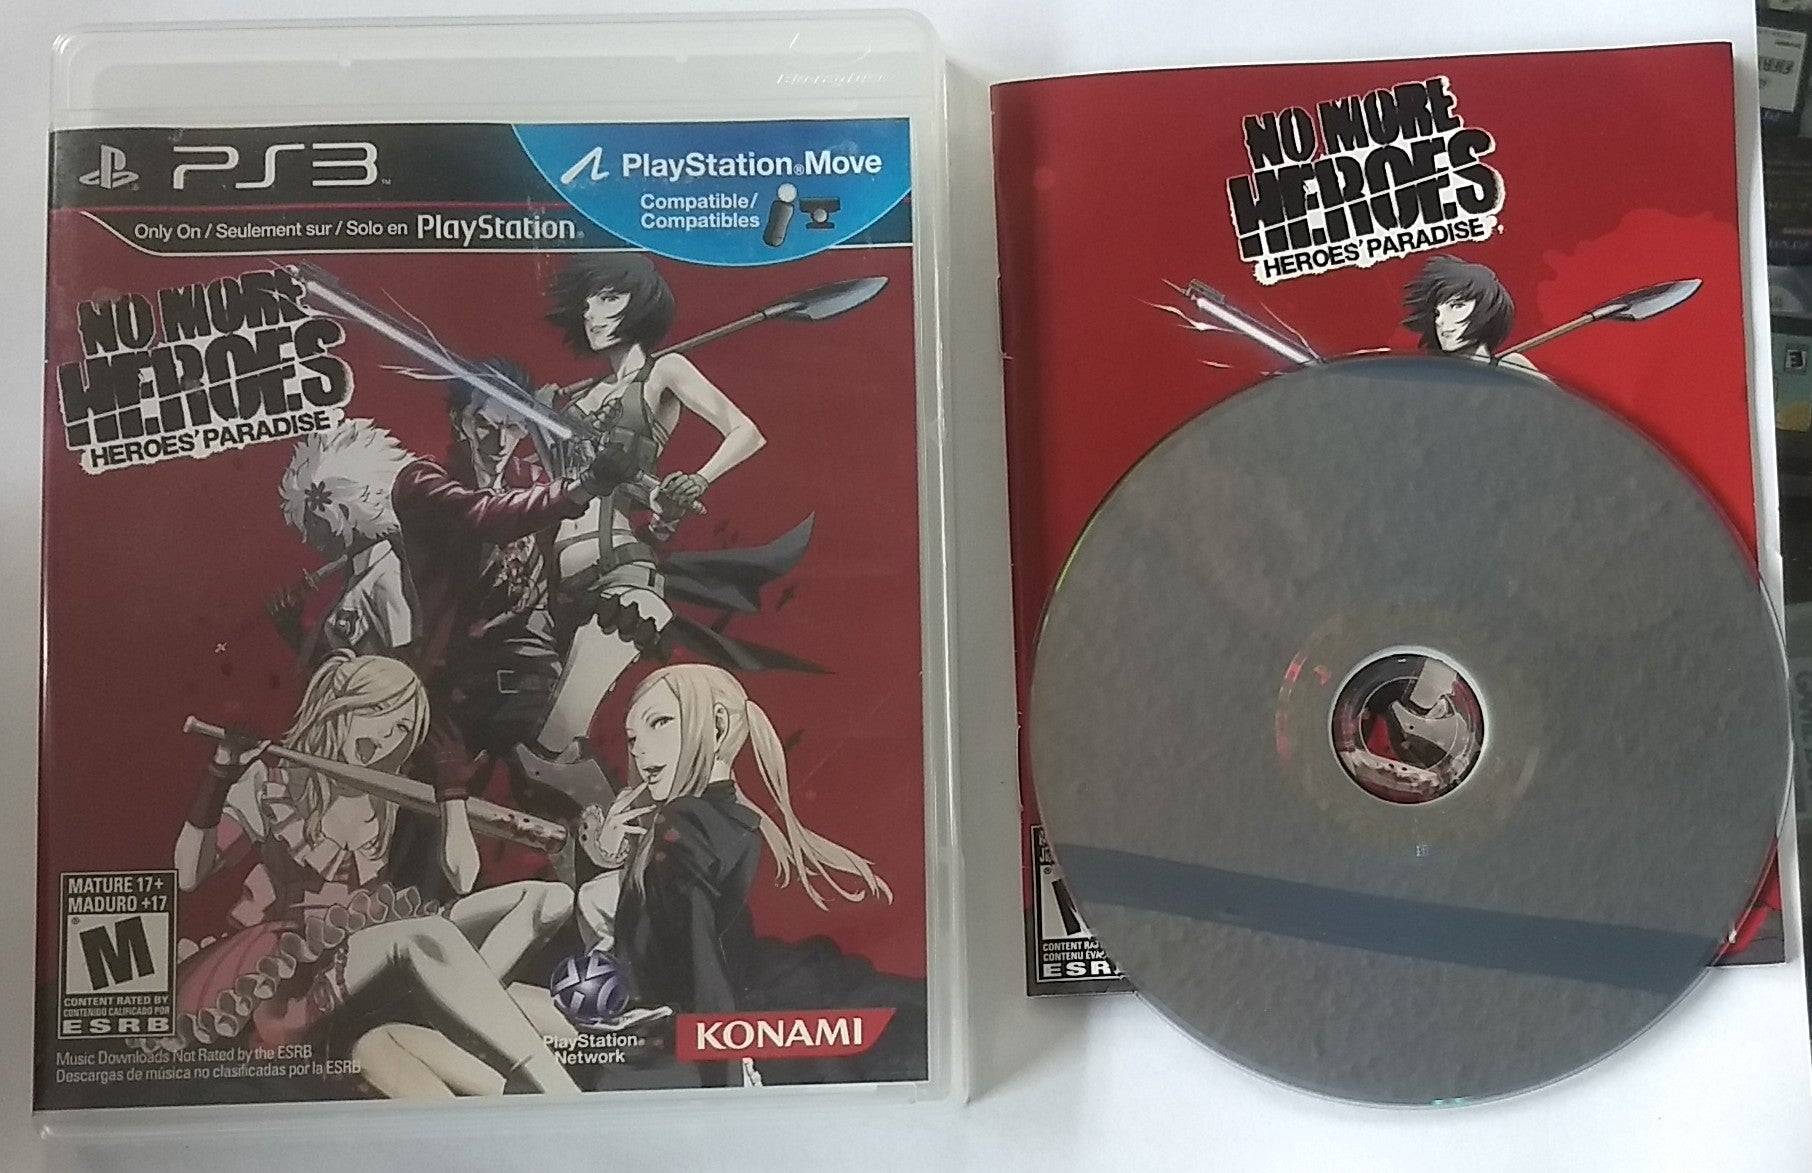 NO MORE HEROES: HEROES' PARADISE (PLAYSTATION 3 PS3) - jeux video game-x